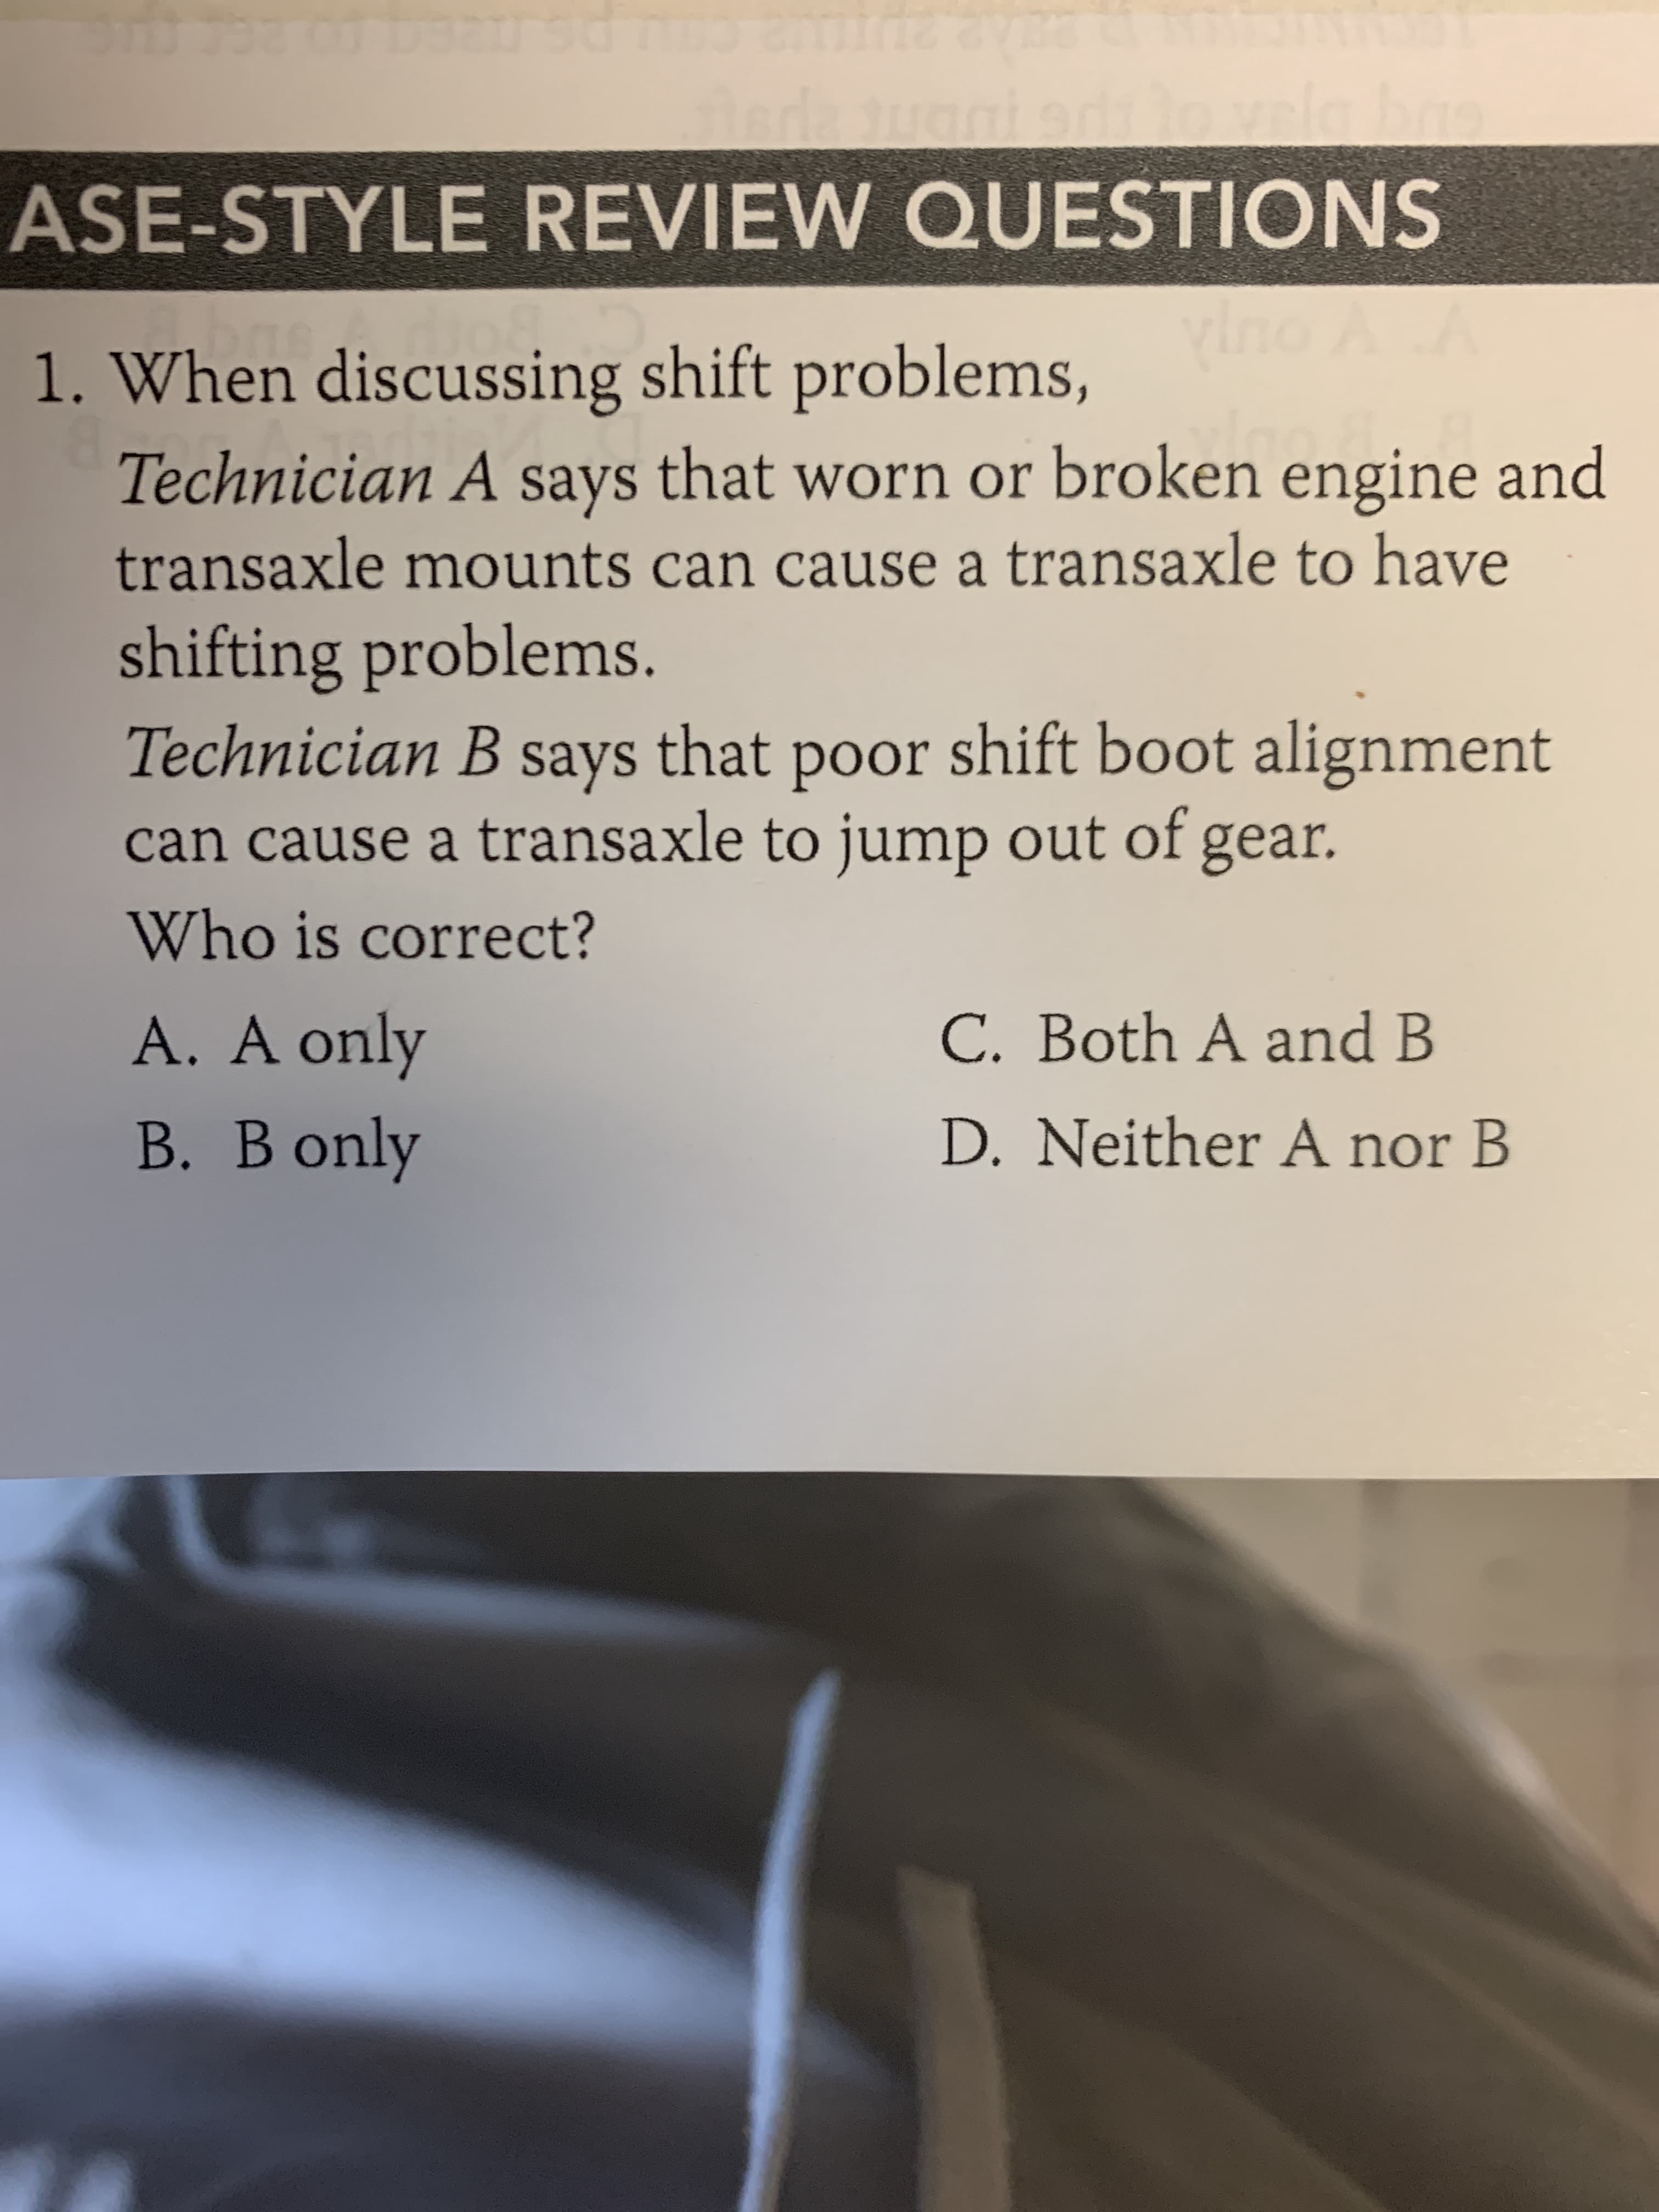 When discussing shift problems,
Technician A says that worn or broken engine and
transaxle mounts can cause a transaxle to have
shifting problems.
Technician B that poor shift boot alignment
can cause a transaxle to jump out of gear.
says
Who is correct?
A. A only
C. Both A and B
B. B only
D. Neither A nor B
